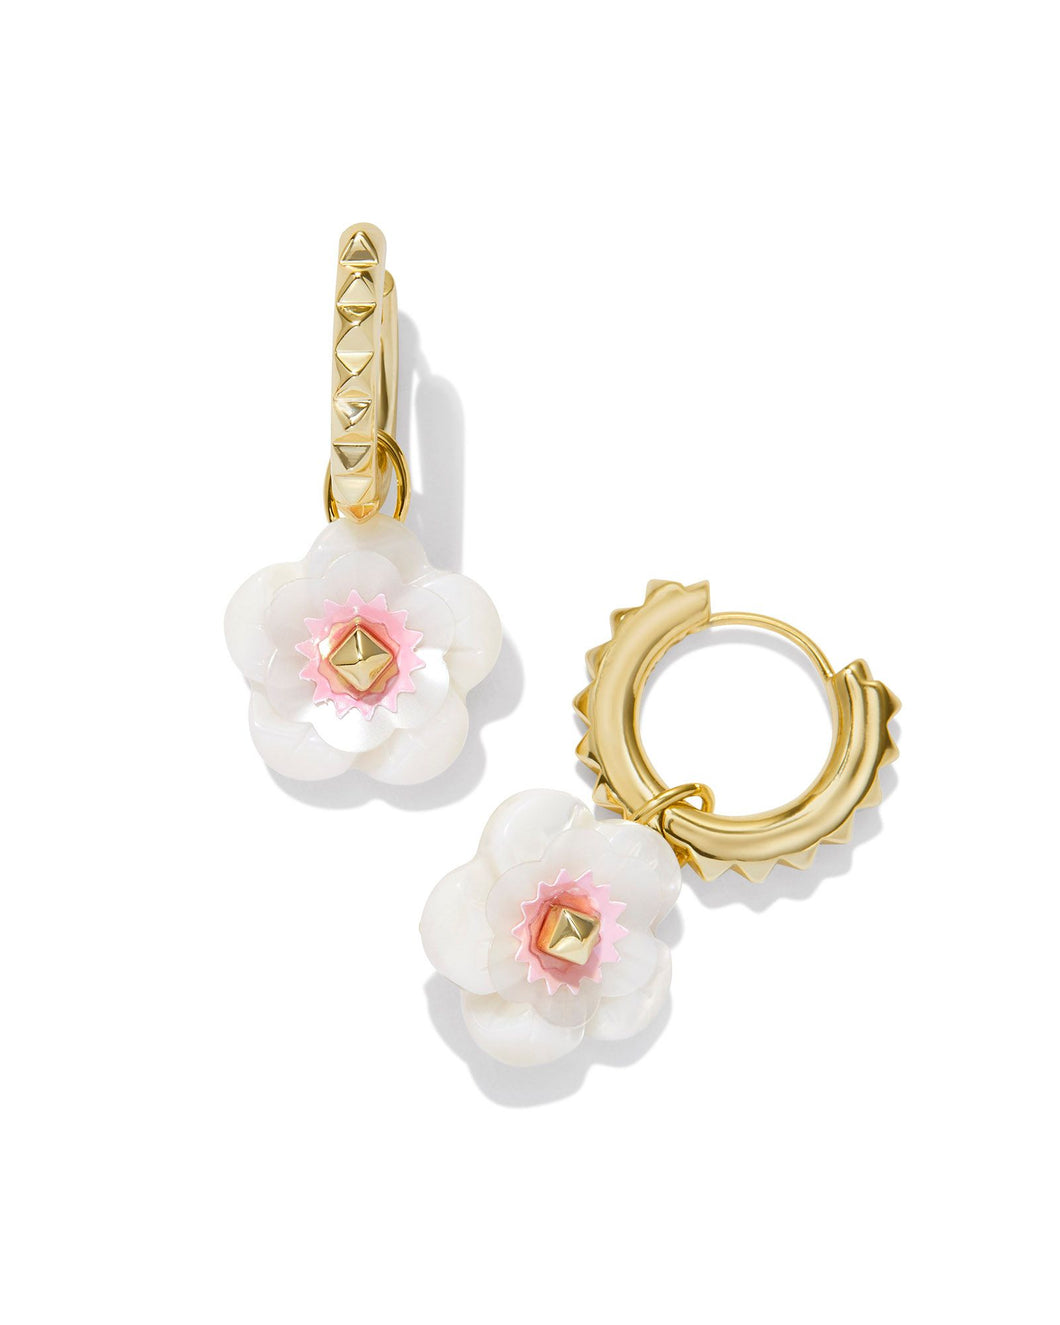 Deliah Gold Huggie Earrings in Iridescent Pink White Mix